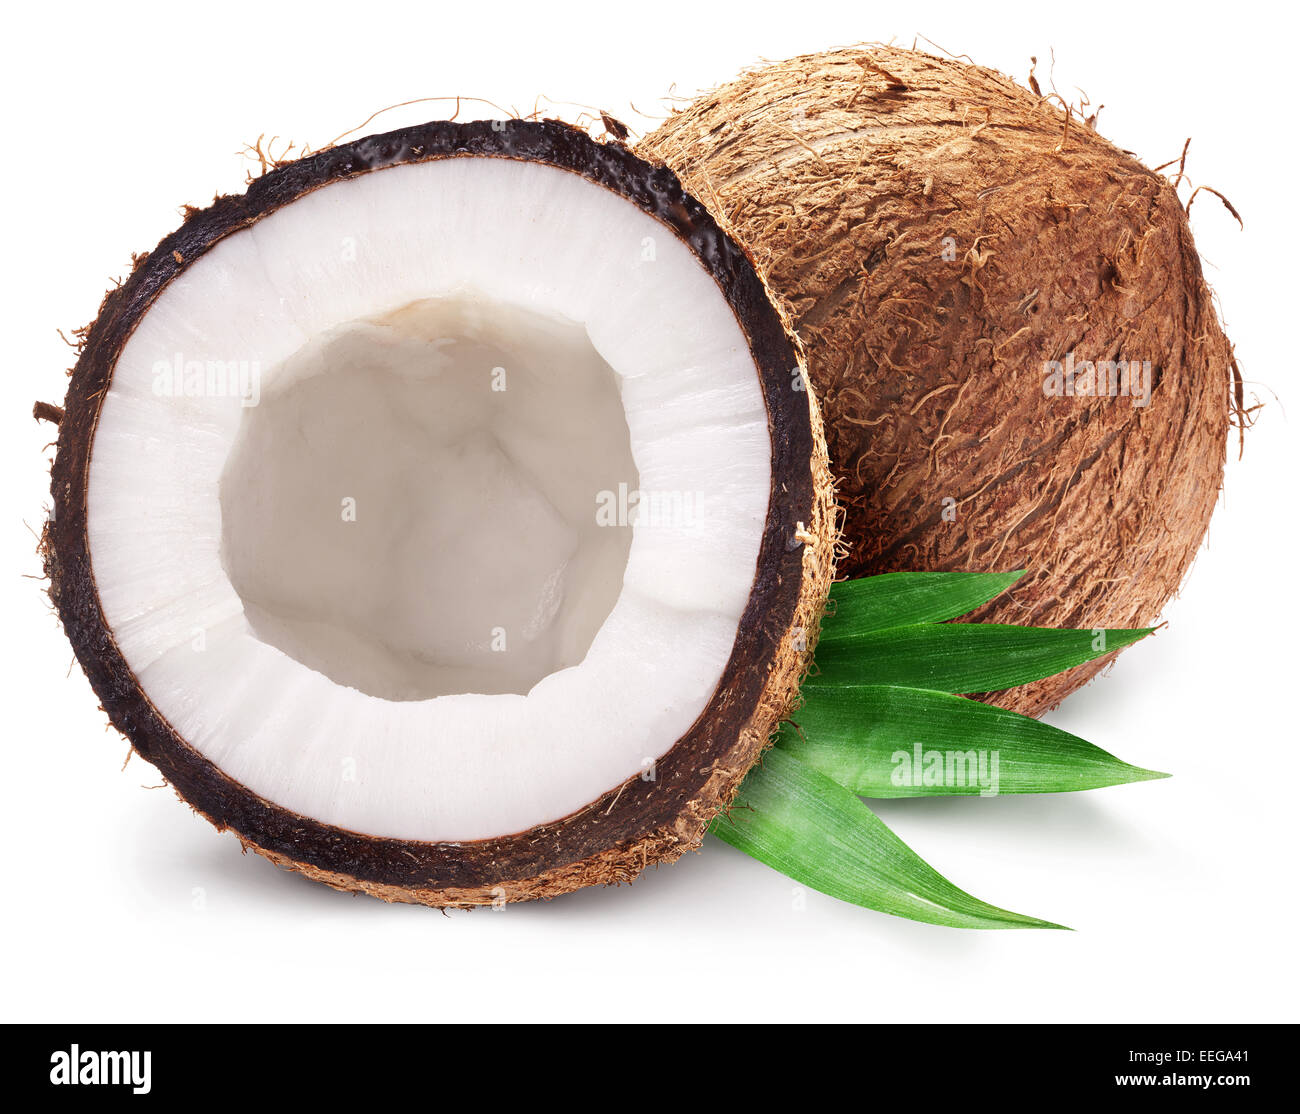 Coconuts and it's half with leaves. File contains clipping paths. Stock Photo